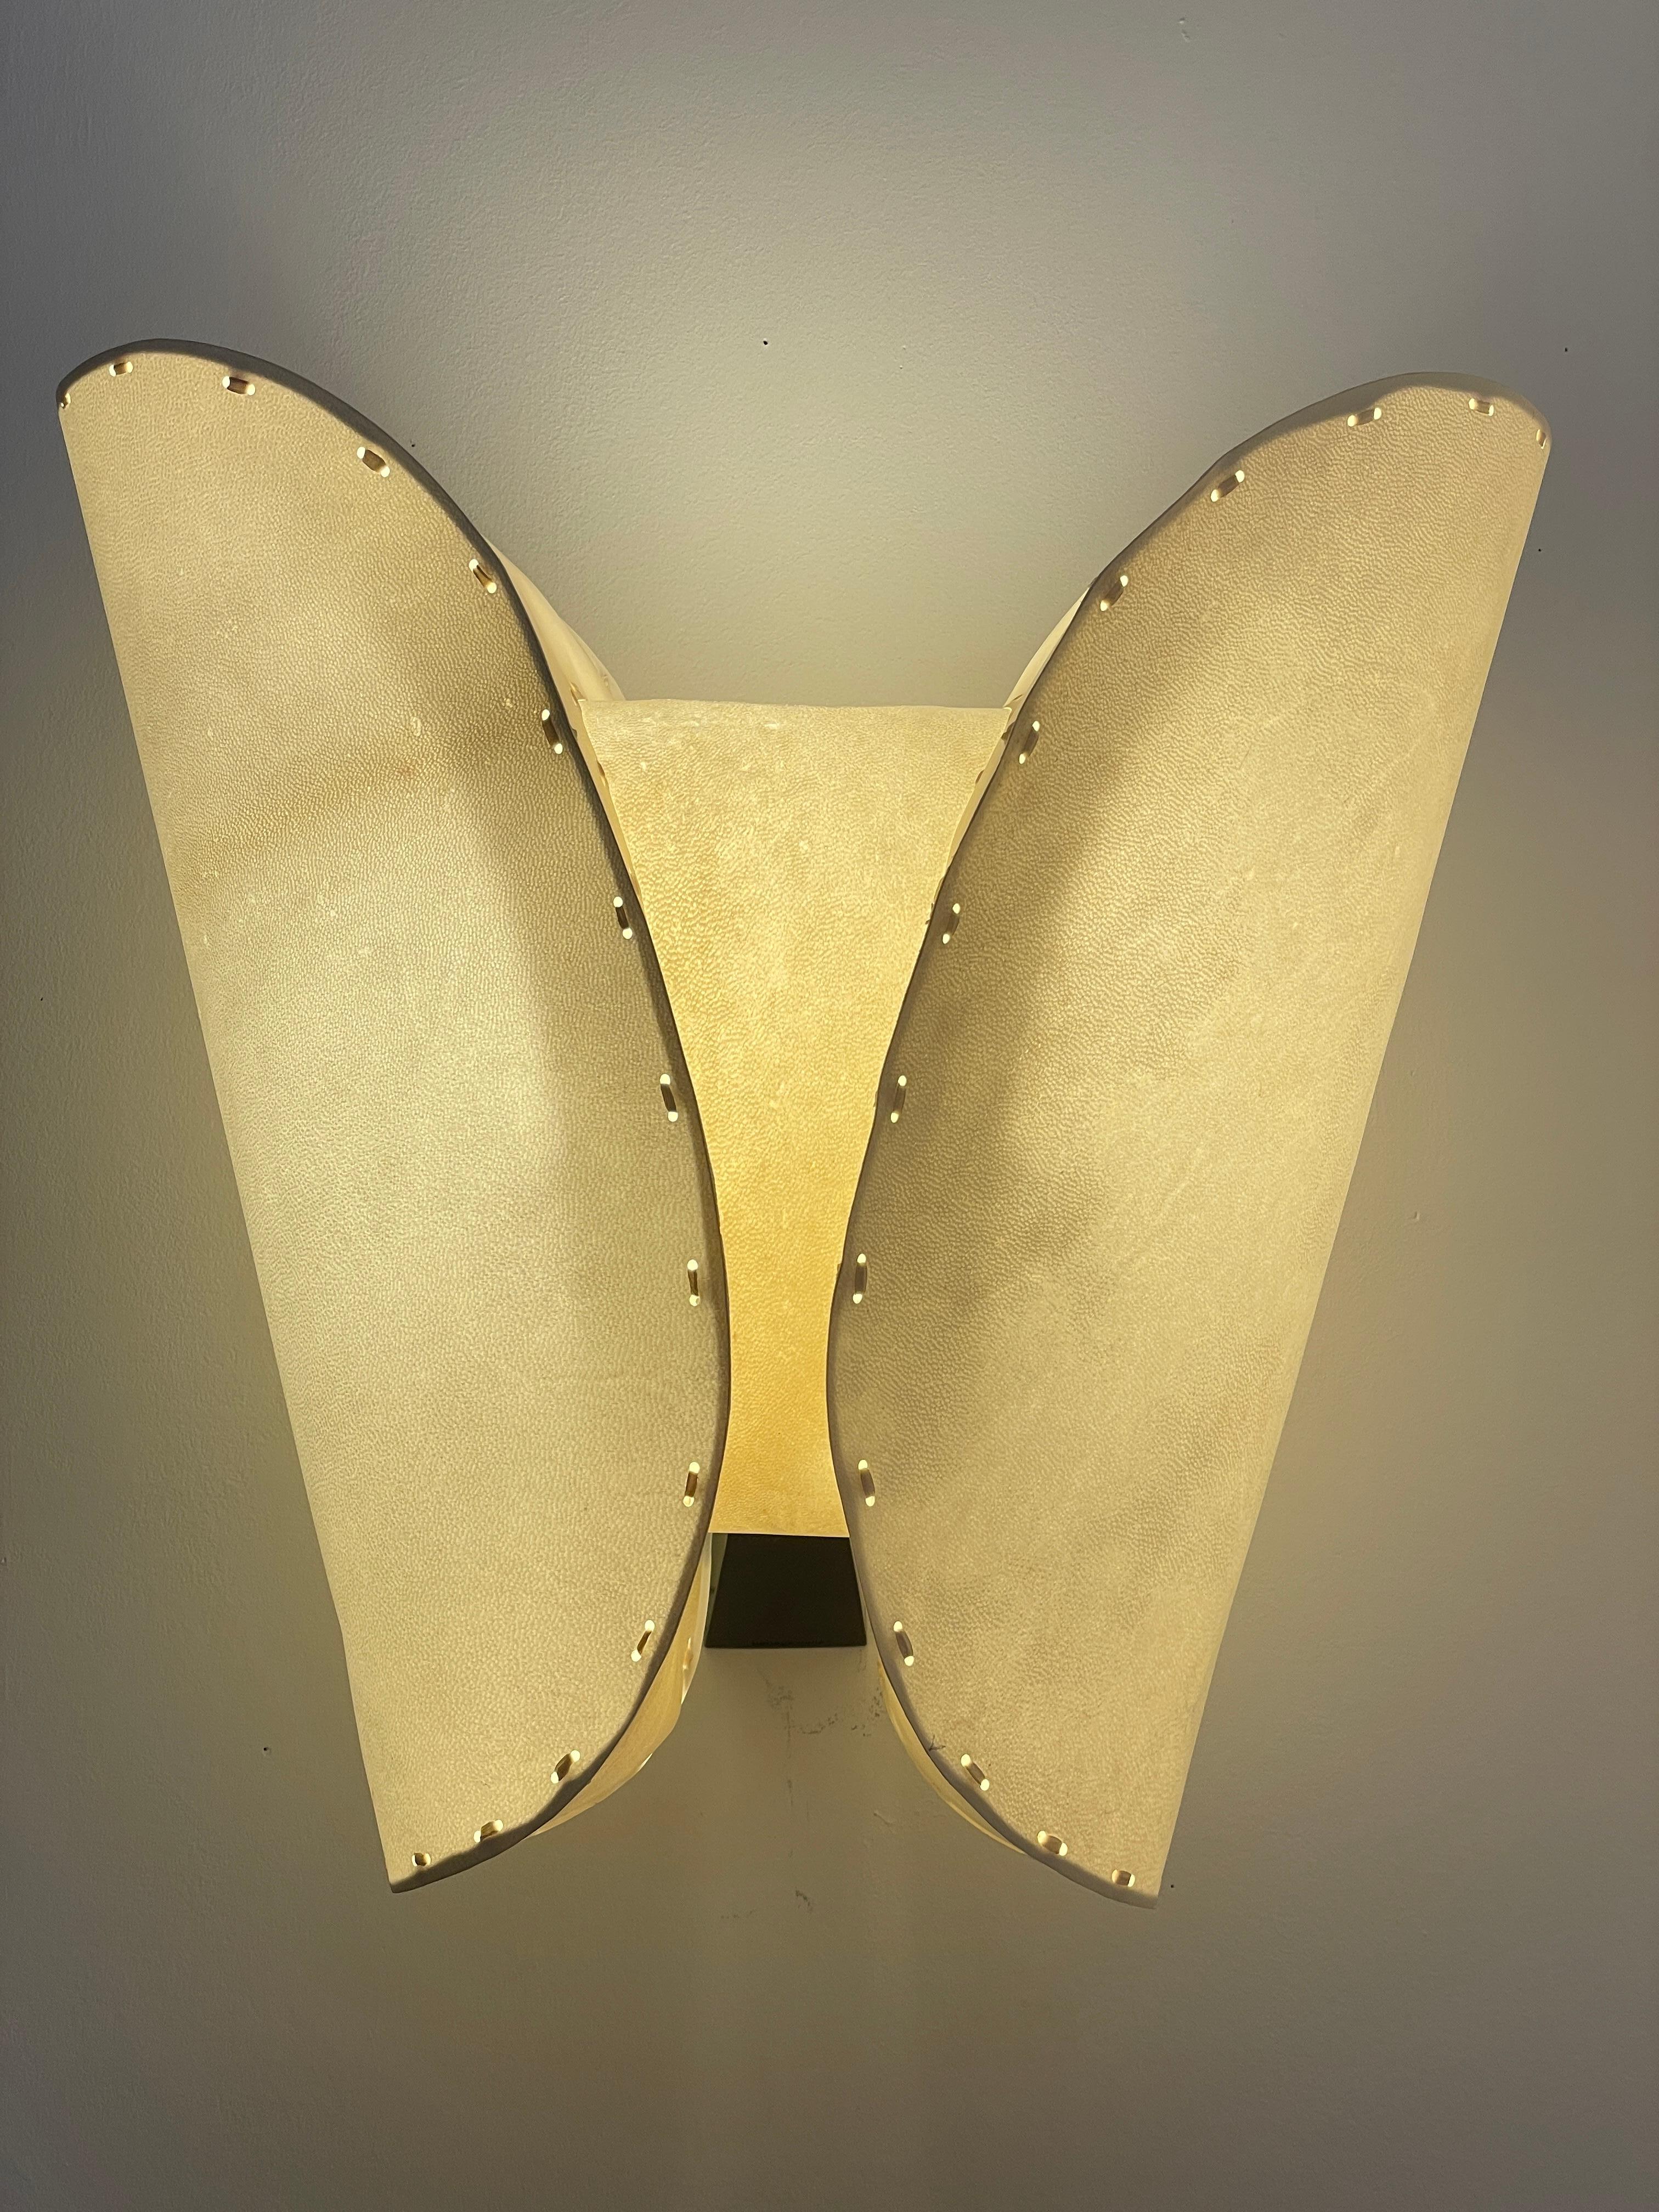 French Mauro Fabbro “Gstaad” Wall Lamps Sconce  Alexandre Biaggi  Botega Volta. Signed  For Sale